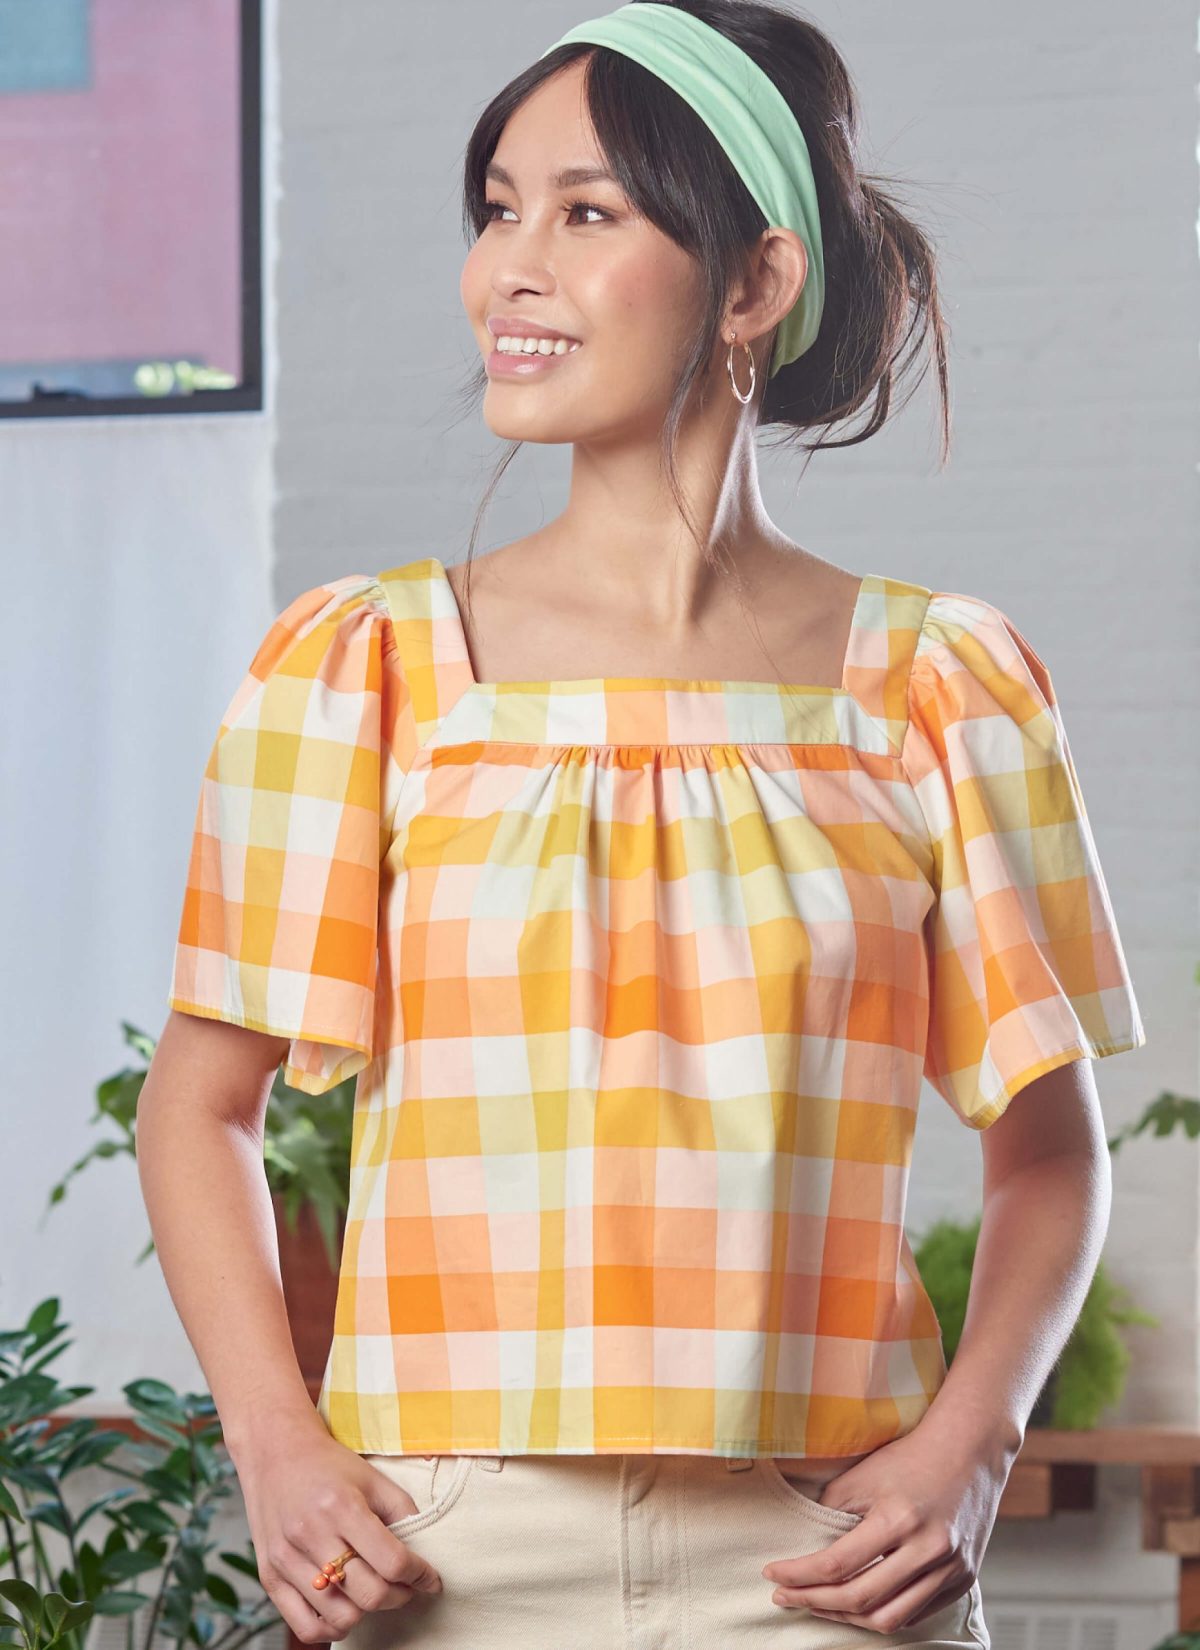 McCall's Sewing Pattern M8202 Misses' Tops